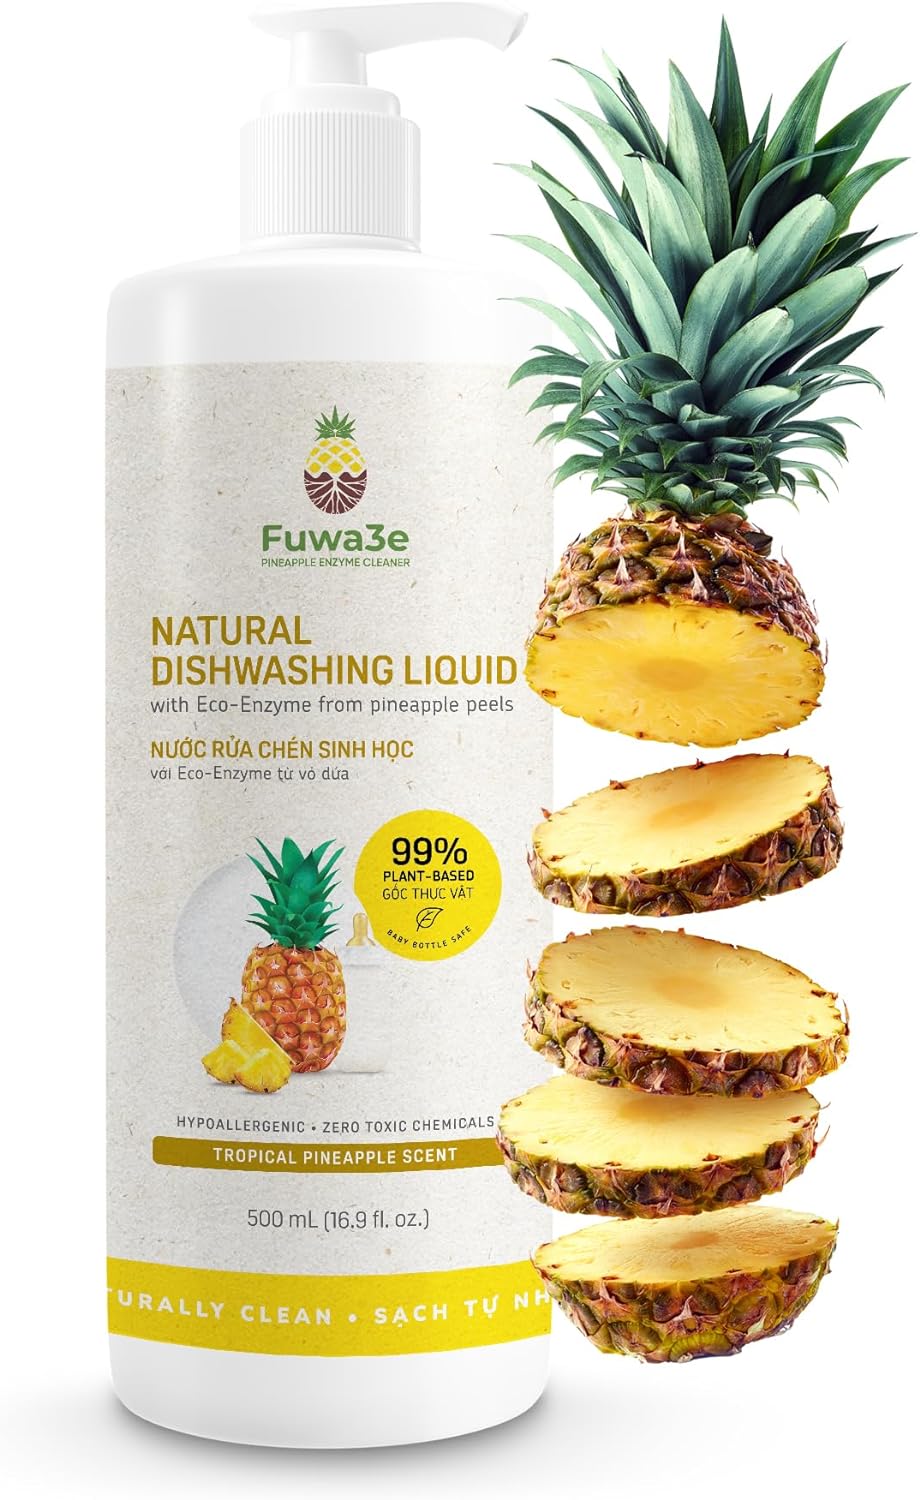 Fuwa3e Pineapple Enzyme Natural Dish Soap Tropical Pineapple Scent - 16.9oz 1 Pack - 99% Plant Based Dish Soap Liquid - Hypoallergenic Dish Soap from Discarded Pineapple Peels